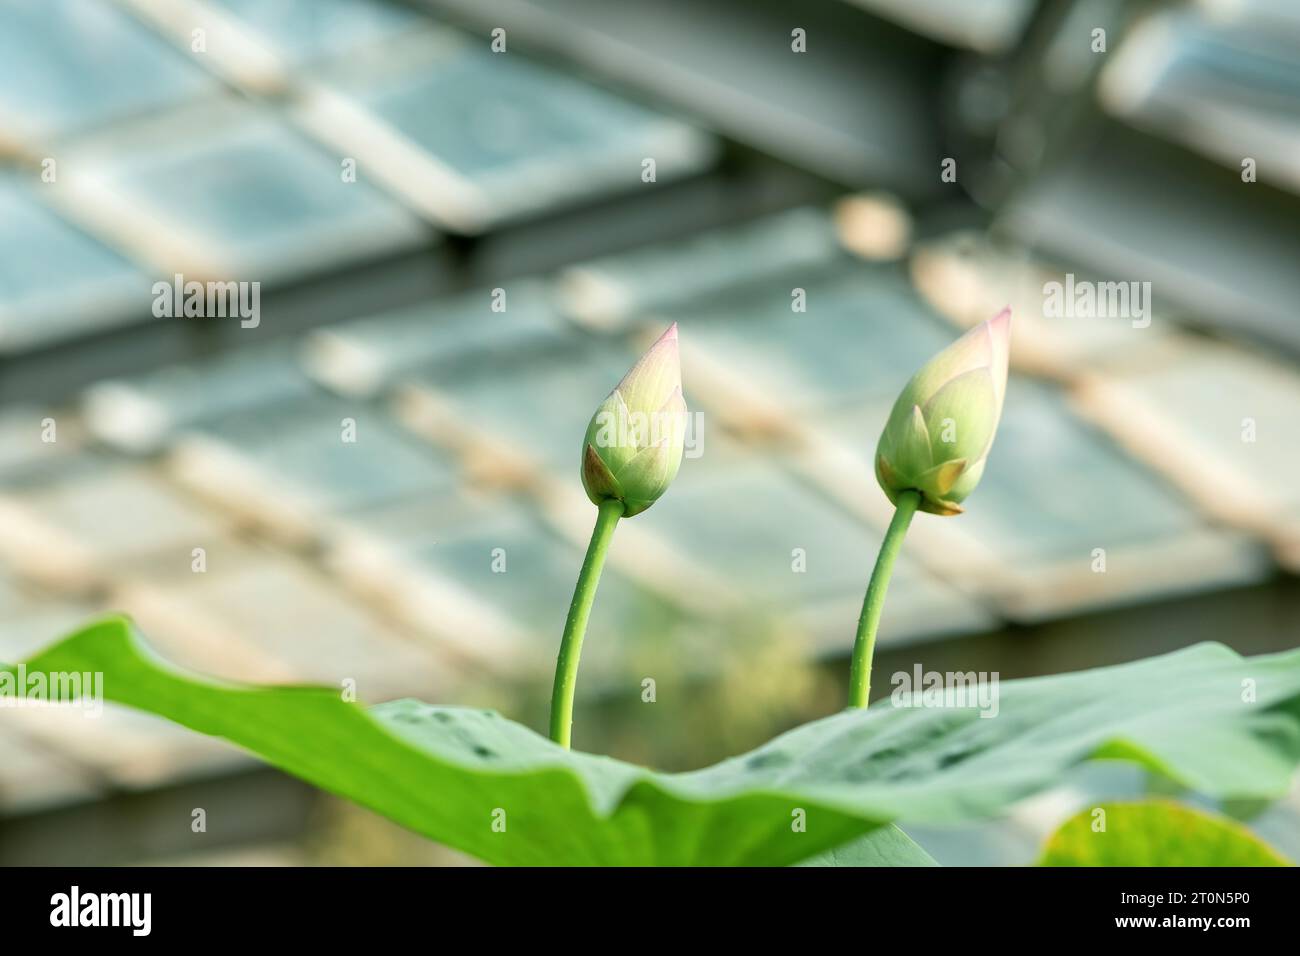 young buds of lotus flower under the dome of the greenhouse Stock Photo